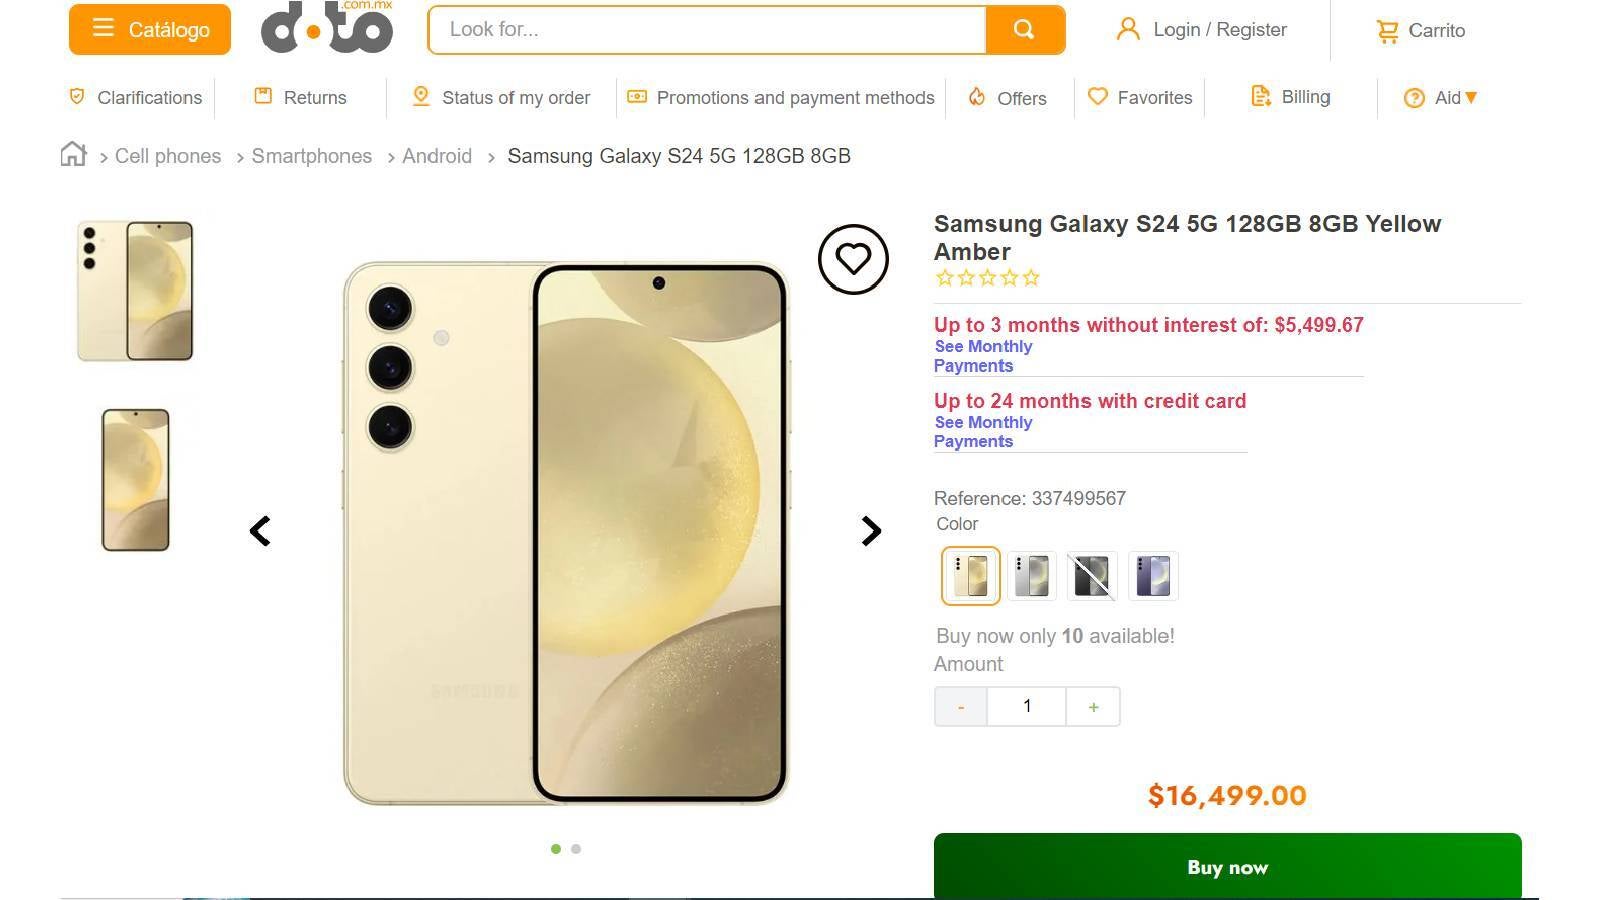 Forget Leaks, Retailer Apparently Already Selling Galaxy S24 But Warns of Limited Stock